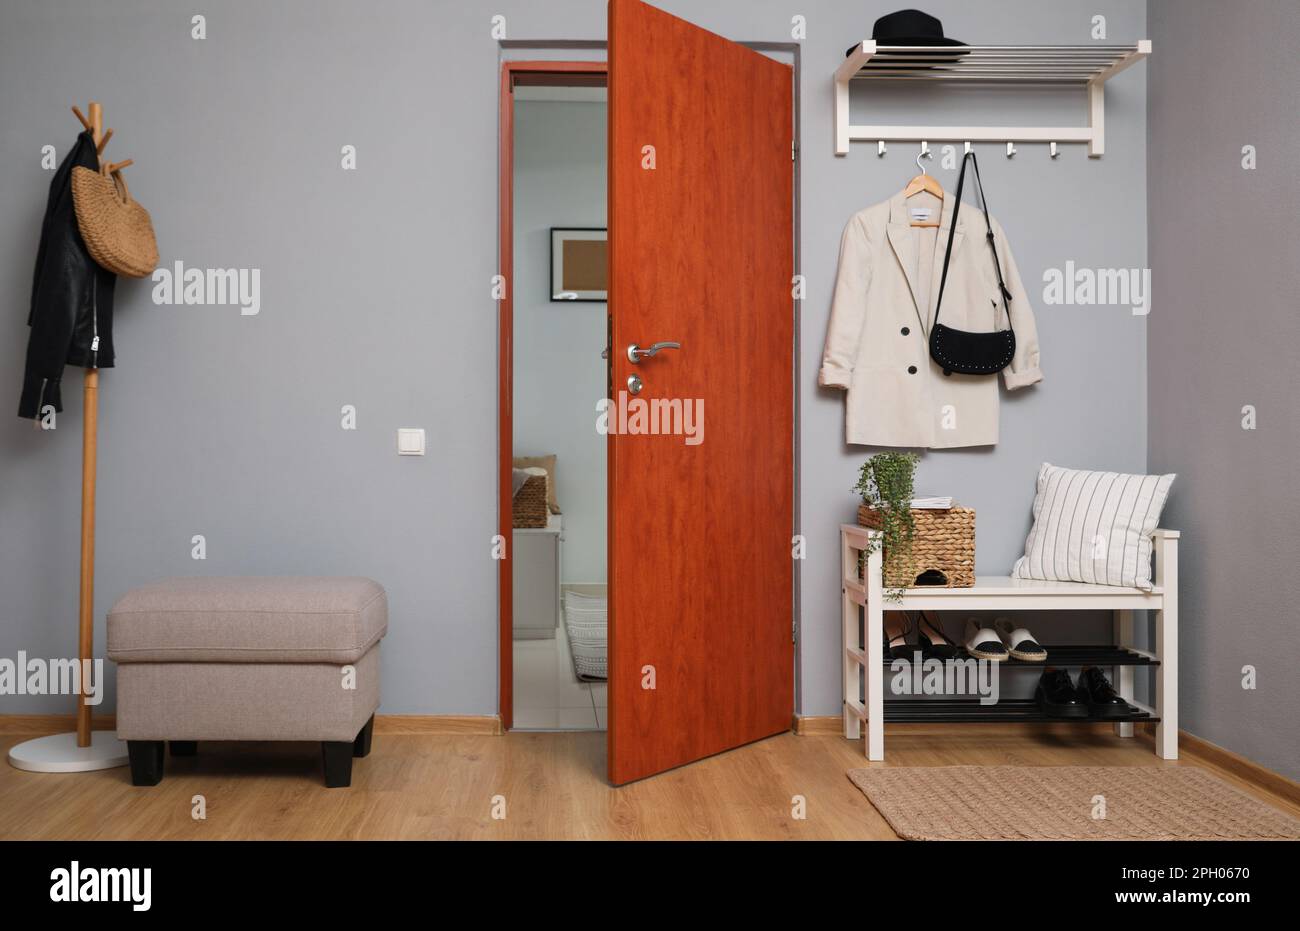 Modern hallway interior with shoe rack and wooden coat stand Stock Photo